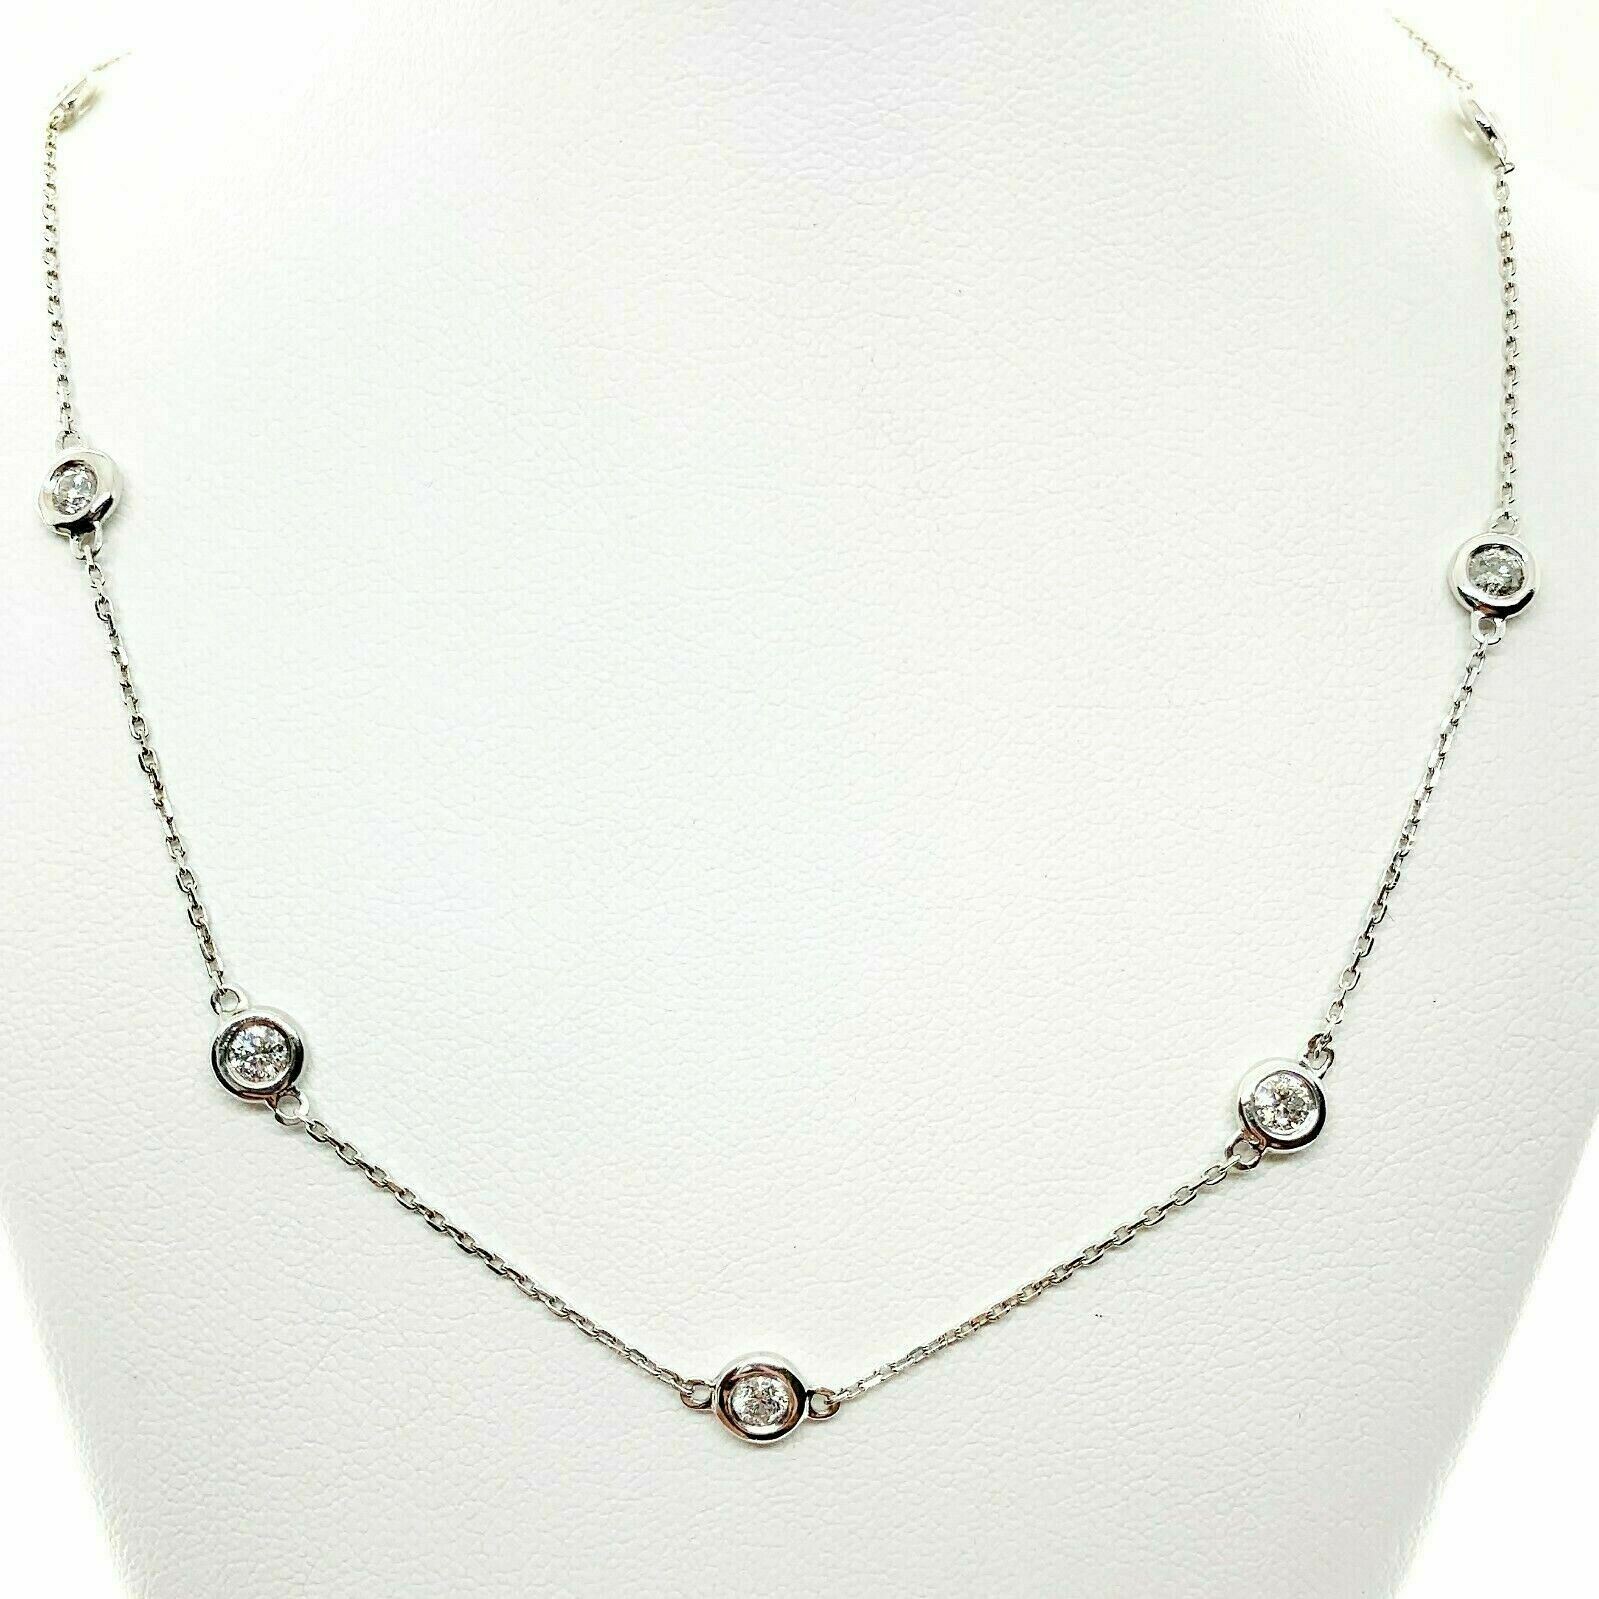 1.40 Carats t.w. Hand Assembled Diamond by The Yard Necklace Chain 14K Gold